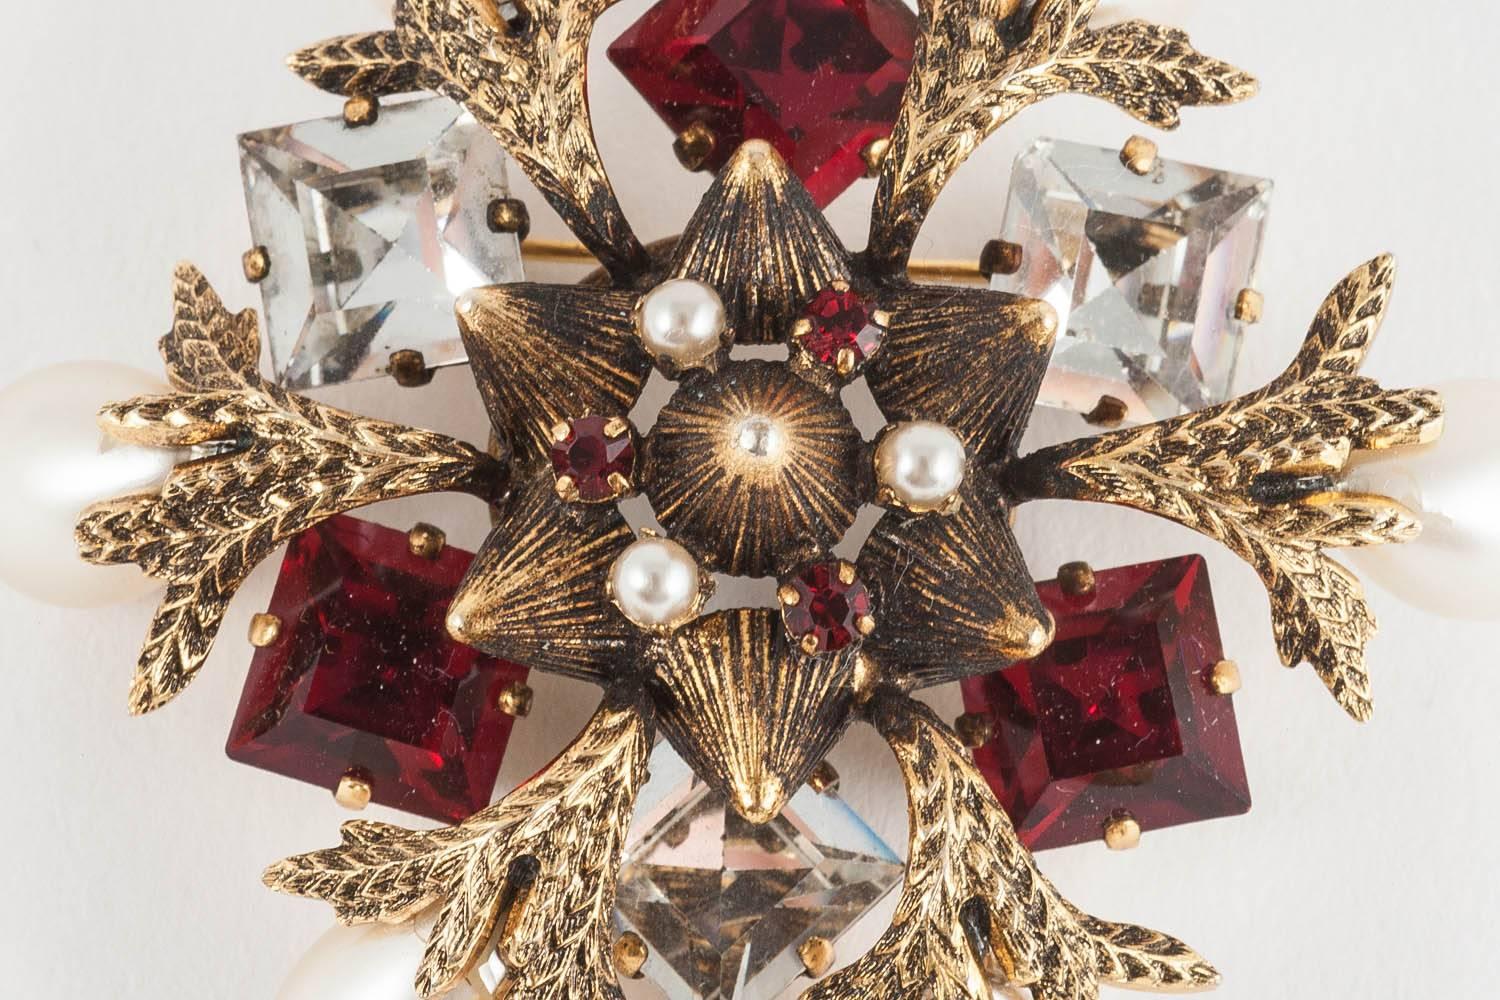 A charming subject translated into jewel form, this brooch is made from a textured gilt metal, formed into points in the centre of the brooch and forming 'branches' holding the teardrop shaped pearls. Set with square cut ruby and clear pastes